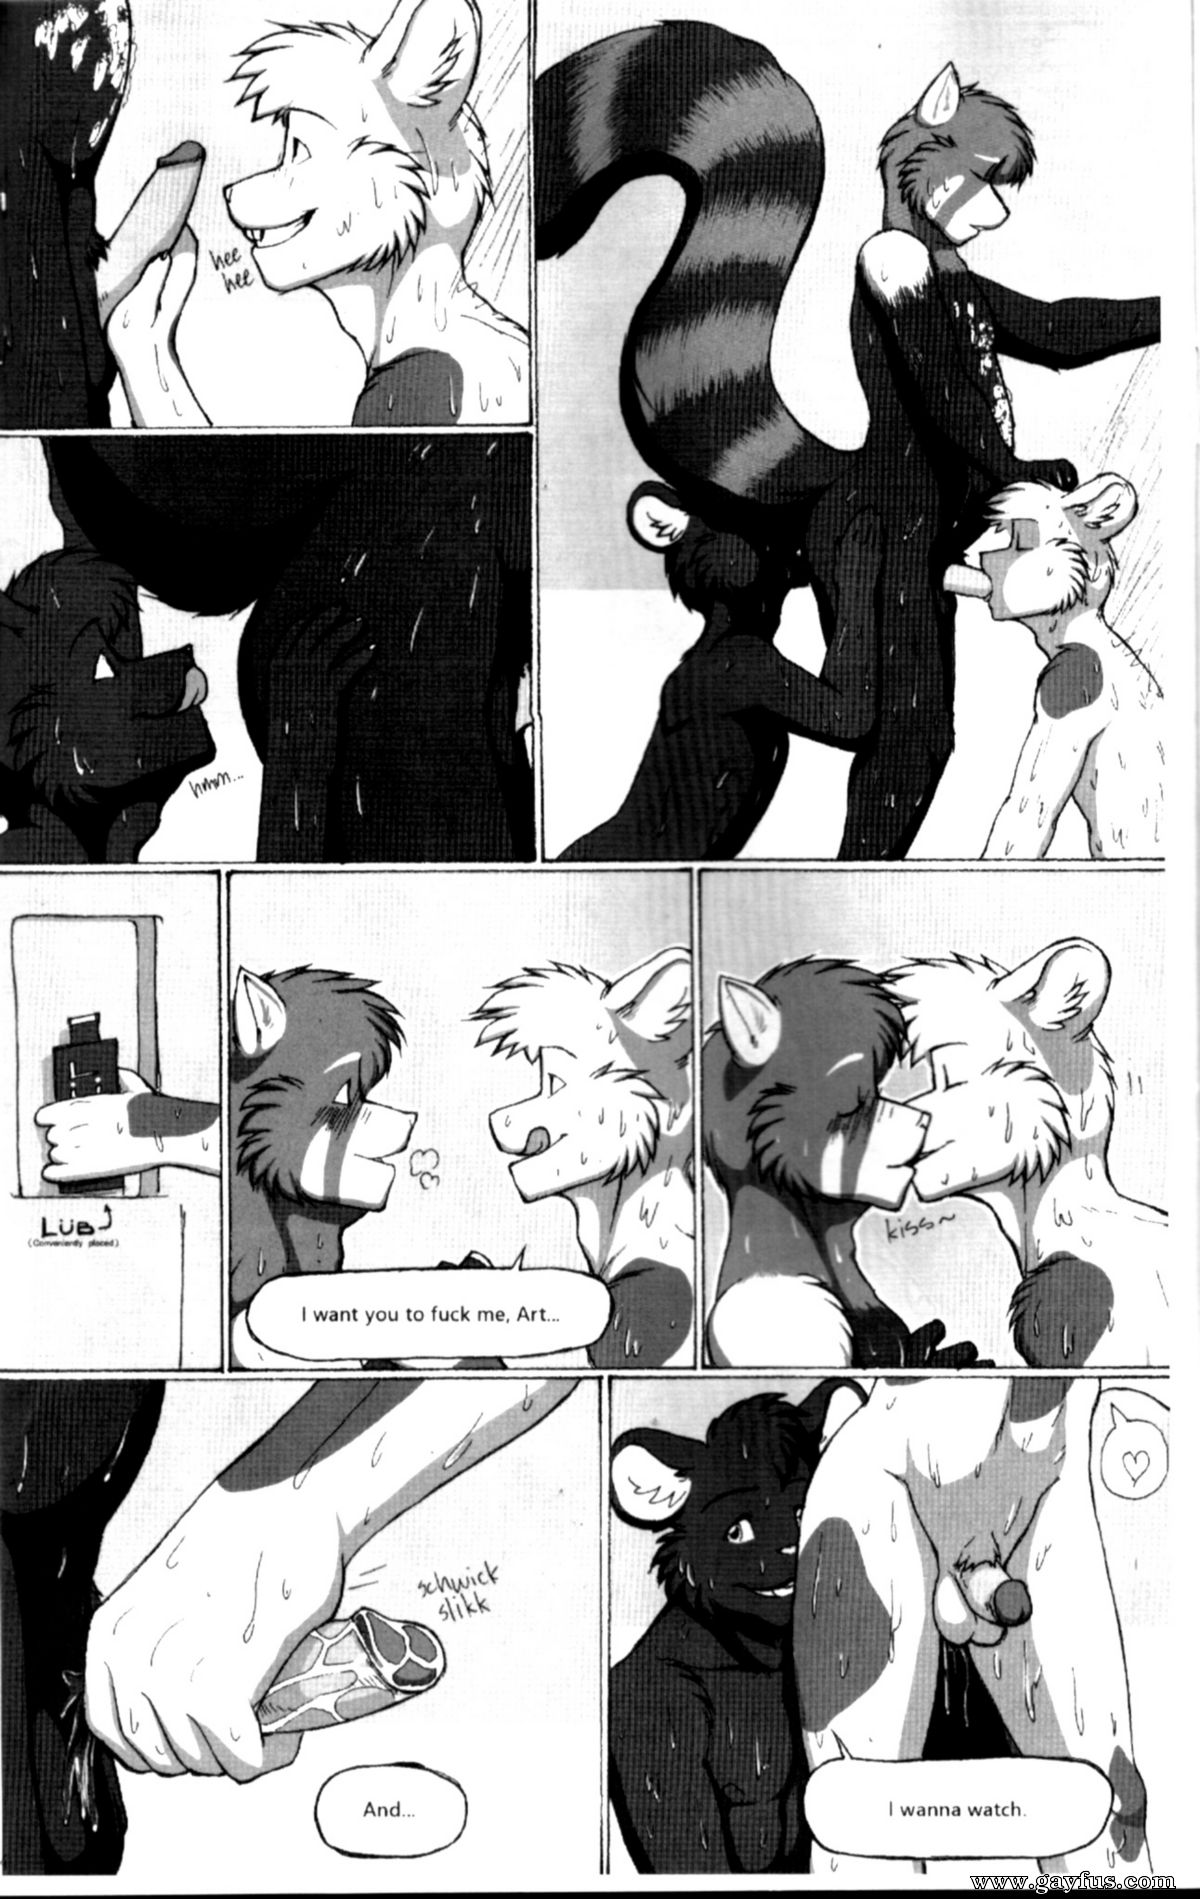 picture MovingIn_Page14.jpg